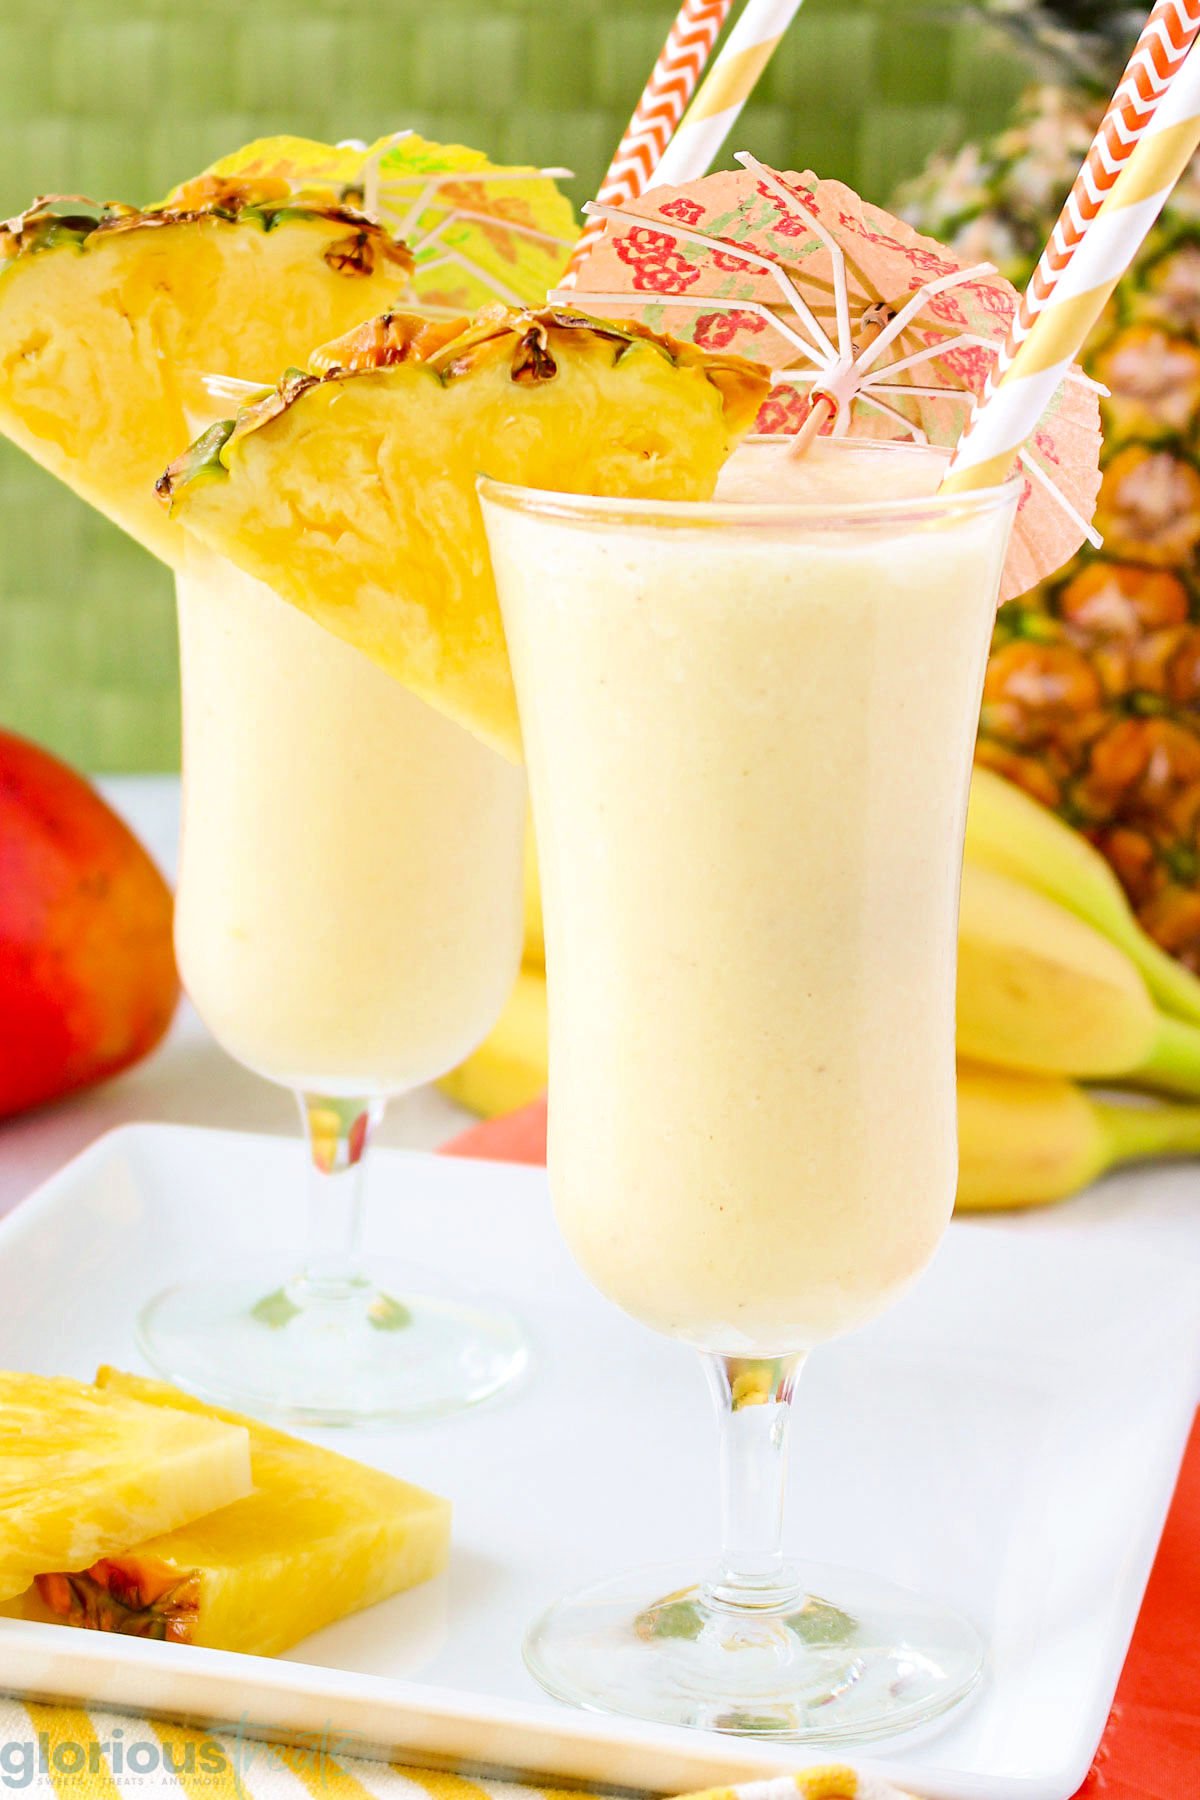 two tropical fruit smoothies garnished with pineapple wedges and small paper umbrellas along with paper straws.